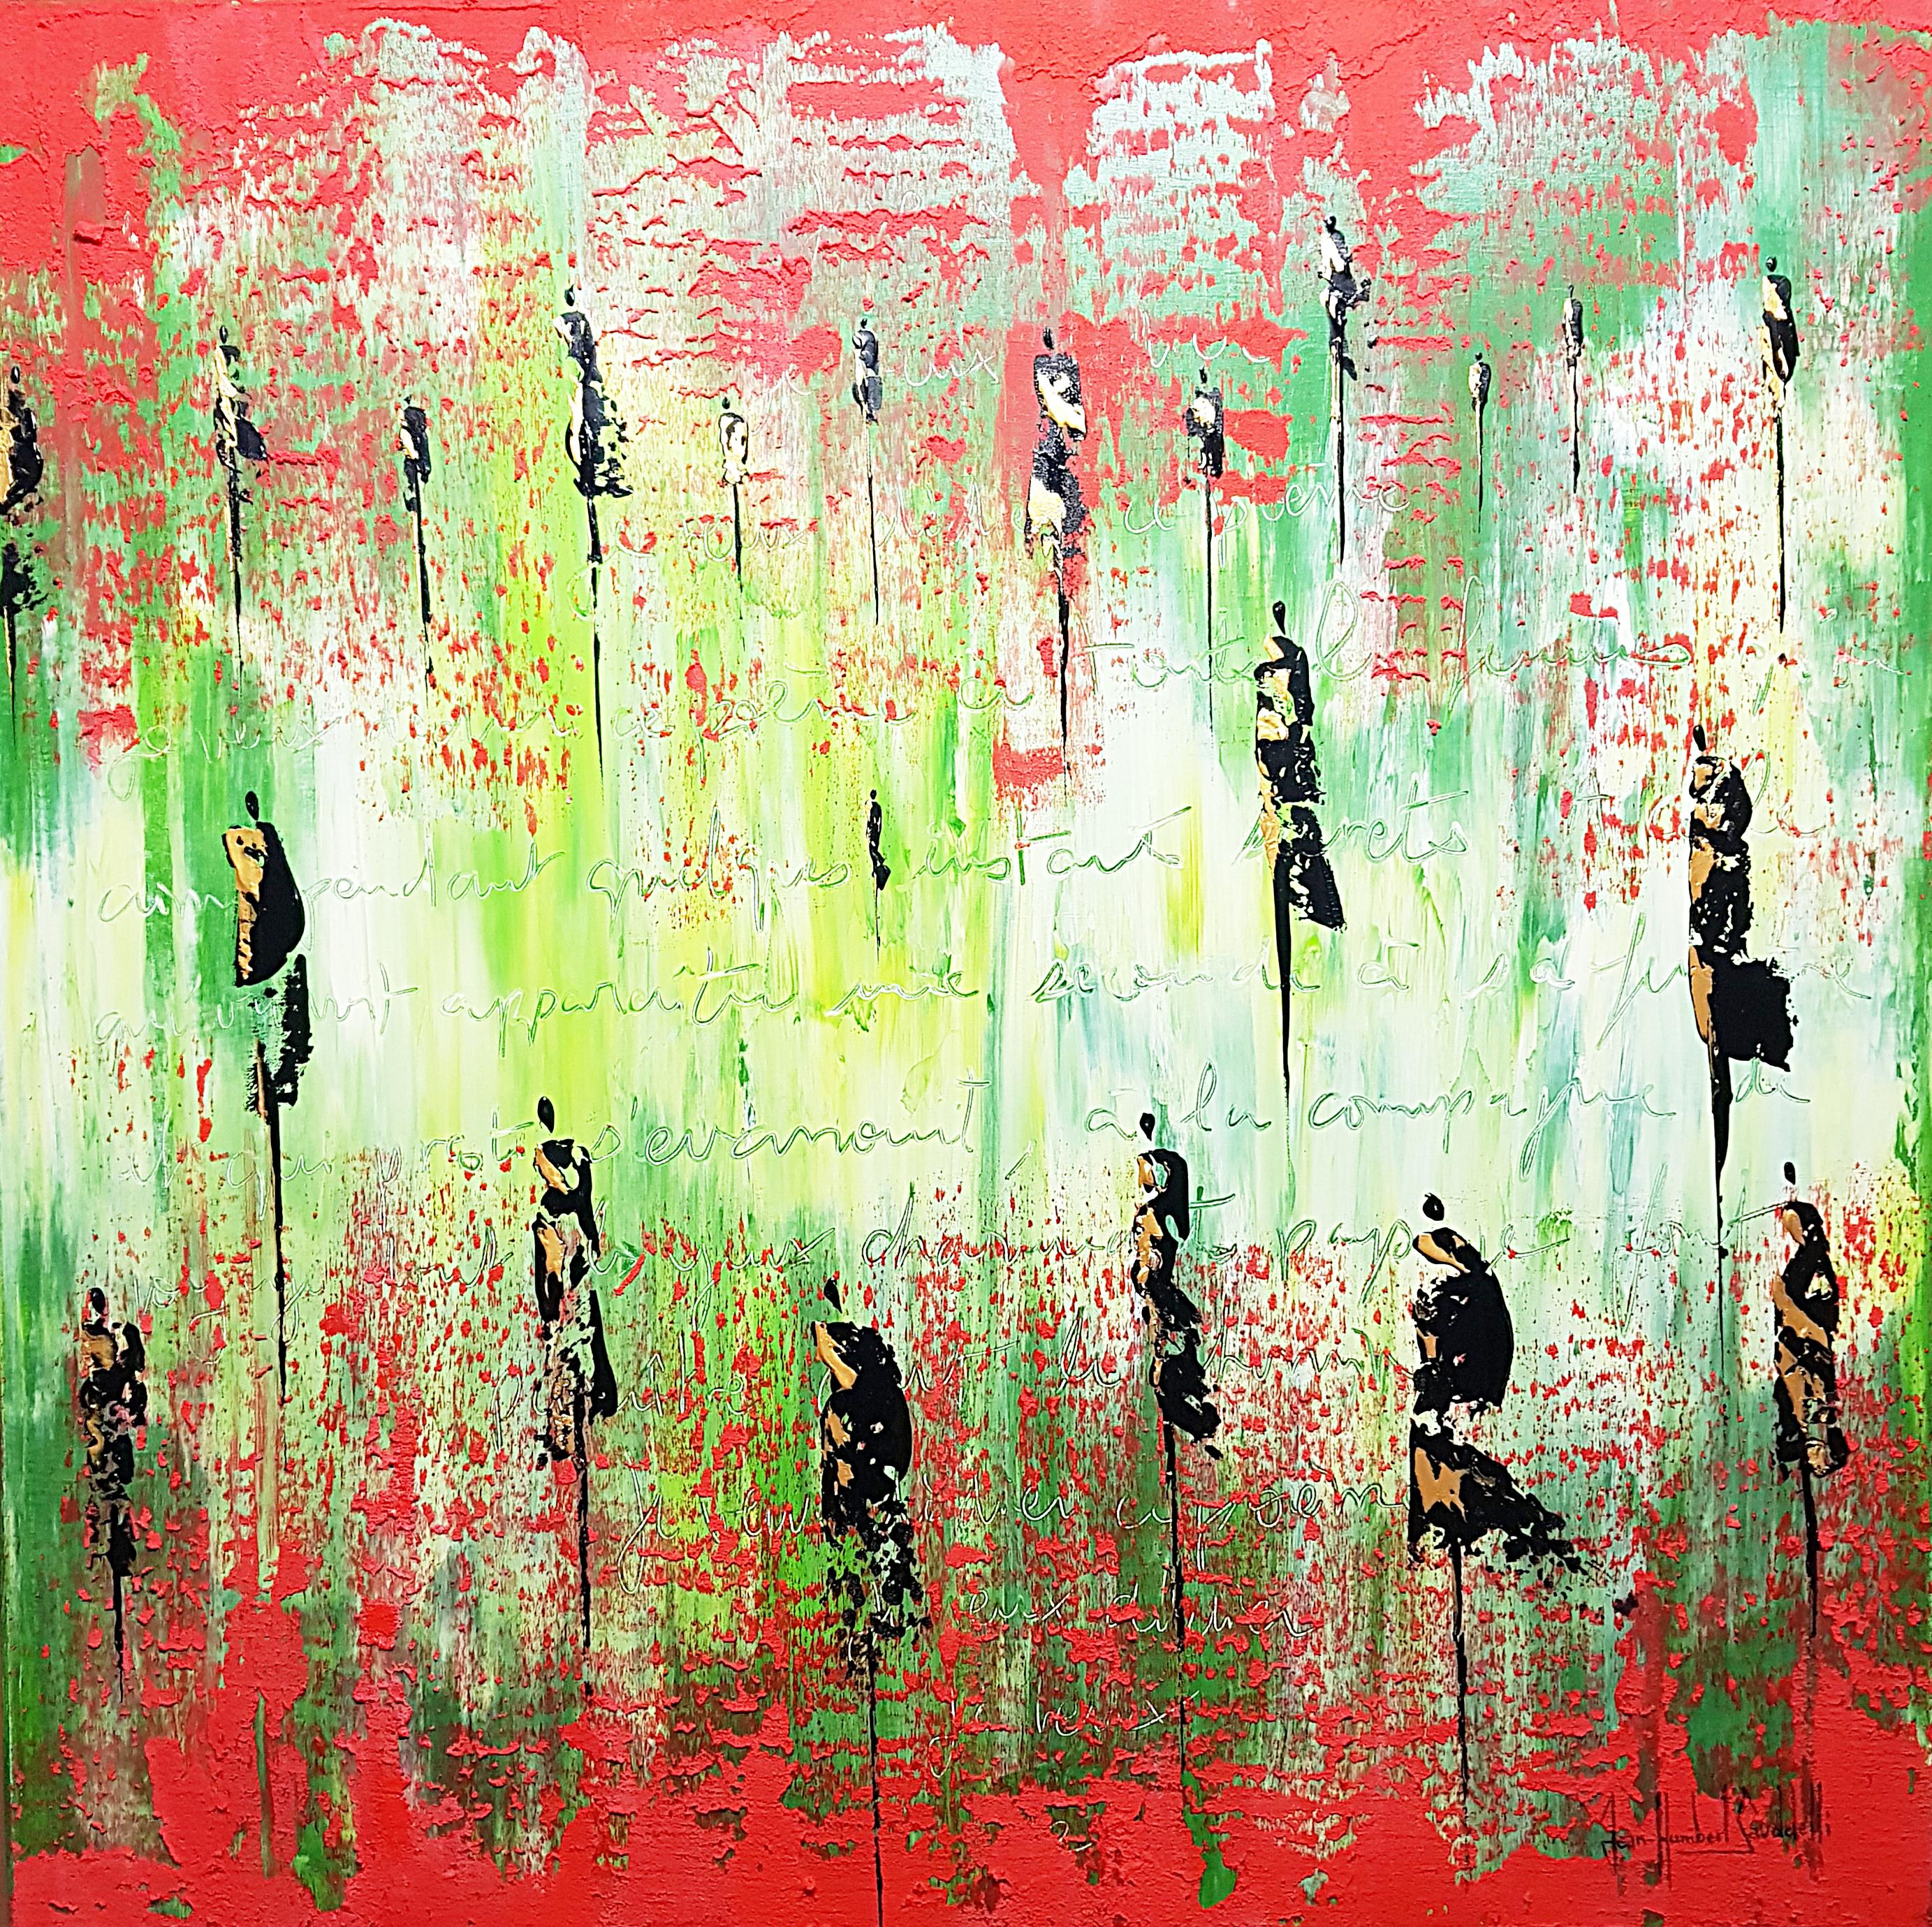 Jean-Humbert Savoldelli Landscape Painting – "The Poem", Red and Green with Text and People Abstract Acrylic Landscape